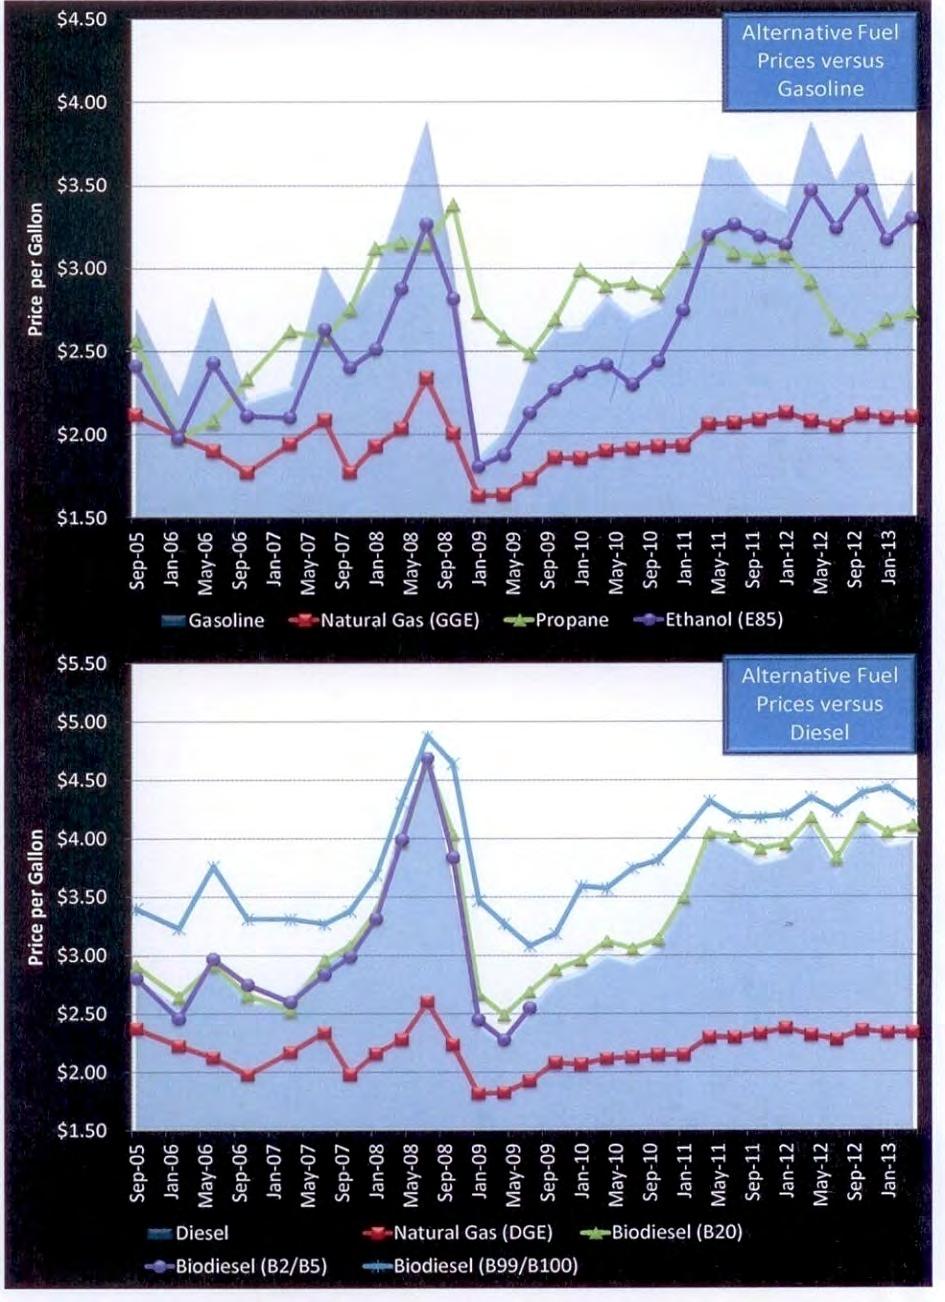 HISTORICAL ALTERNATIVE FUEL PRICES FROM PREVIOUS Clean Cities REPORTS These graphs include prices collected as part of the current Price Report activity, which began in September 2005.